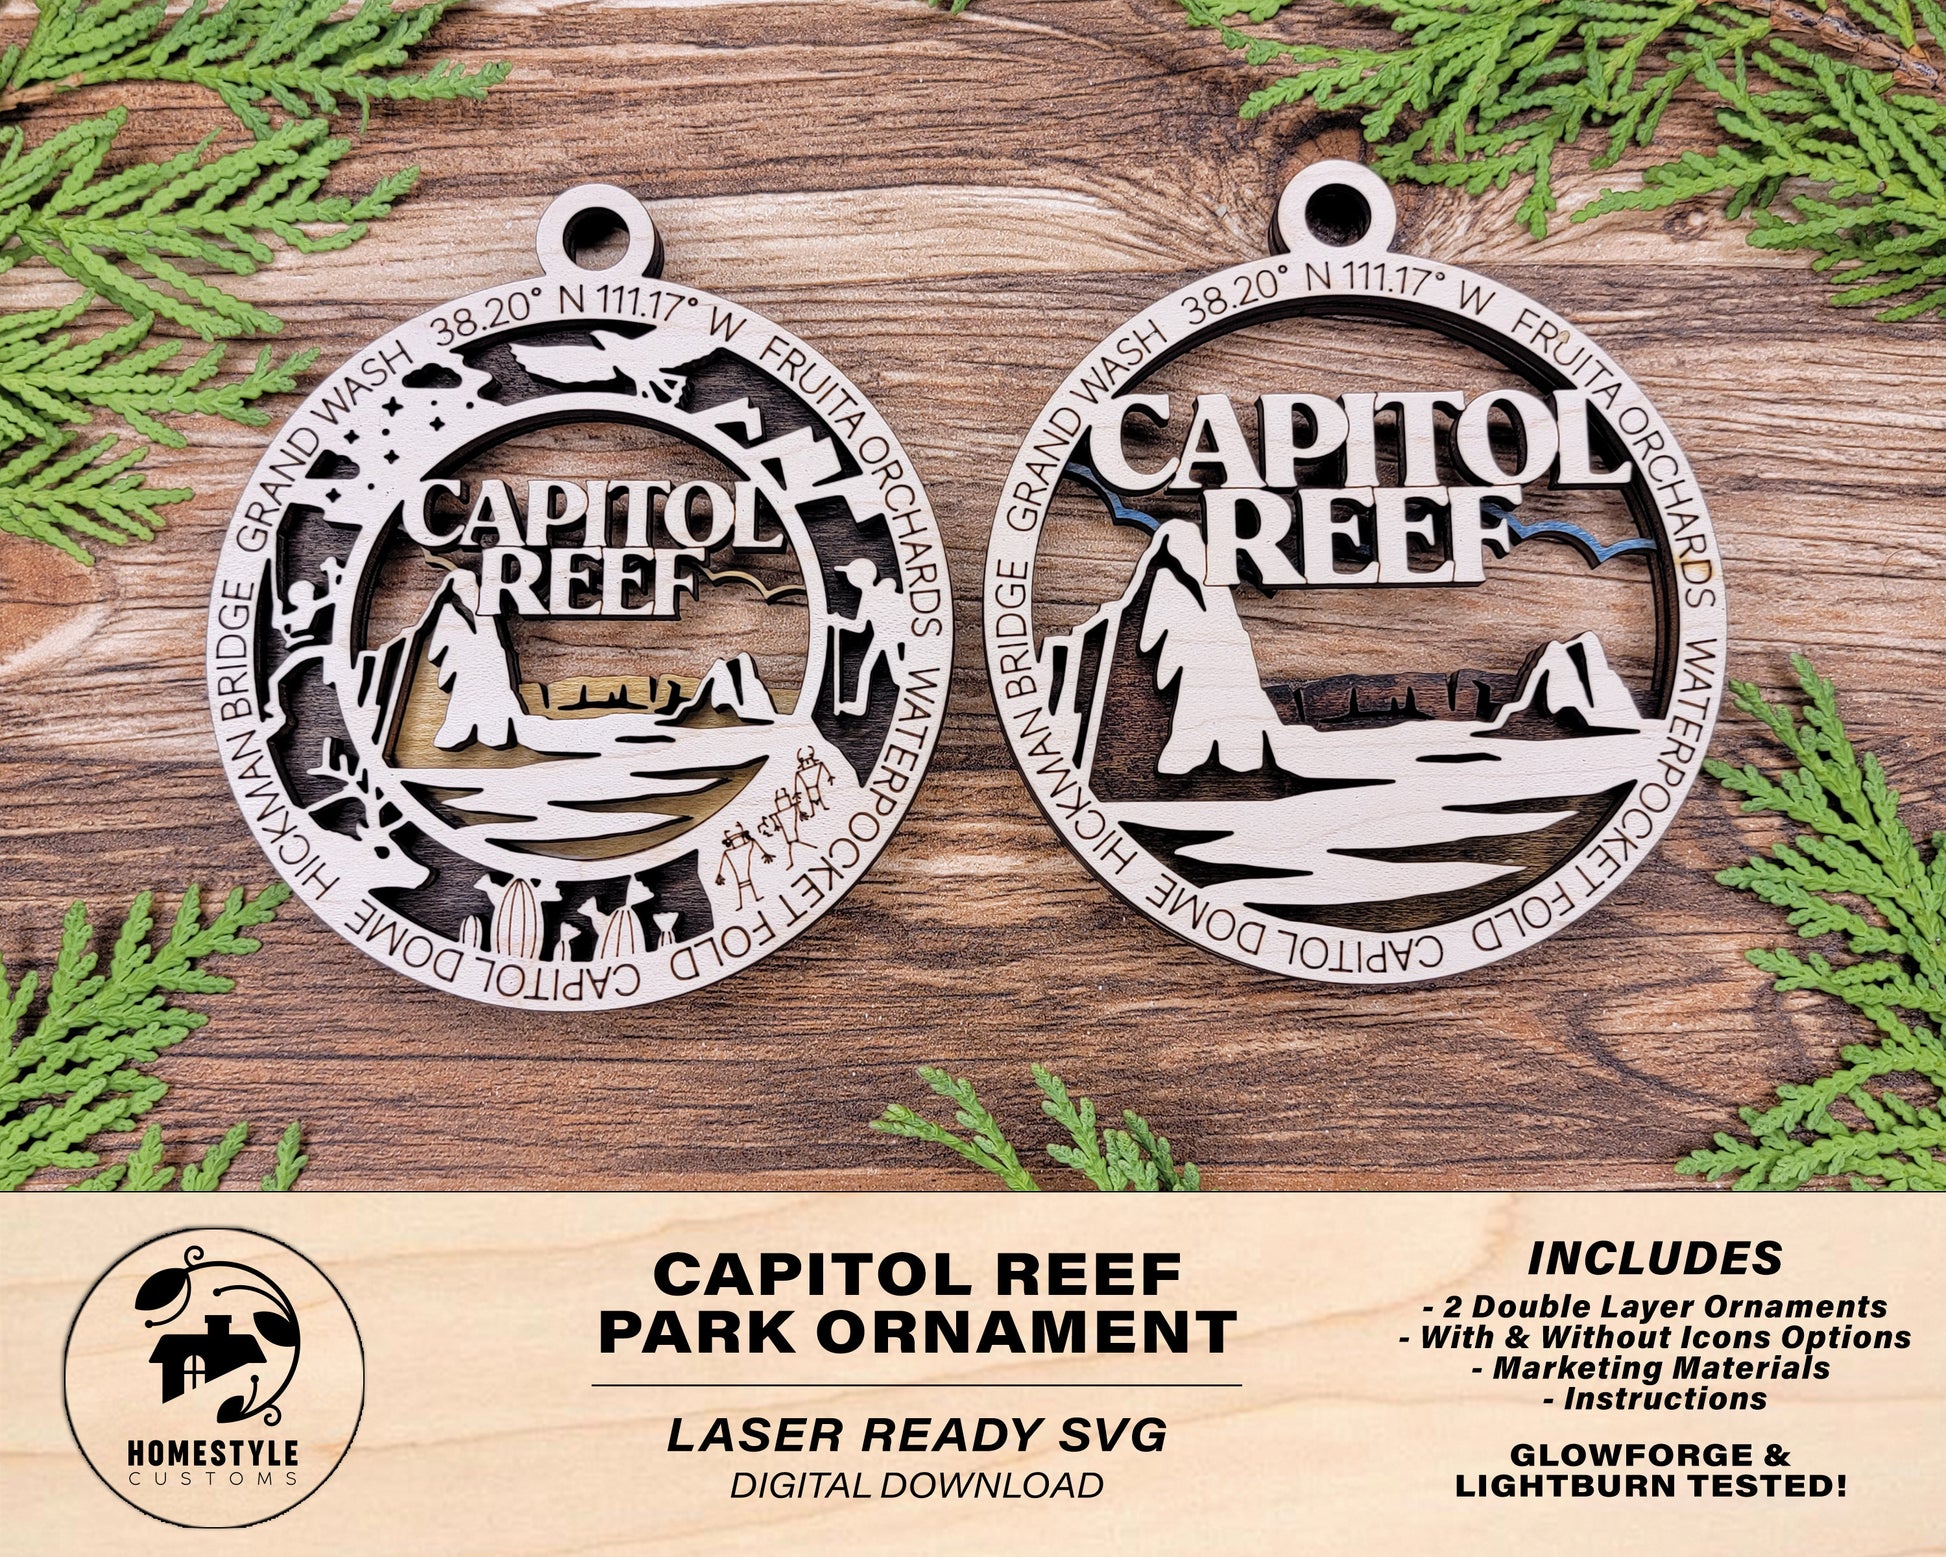 Capitol Reef Park Ornament - Includes 2 Ornaments - Laser Design SVG, PDF, AI File Download - Tested On Glowforge and LightBurn